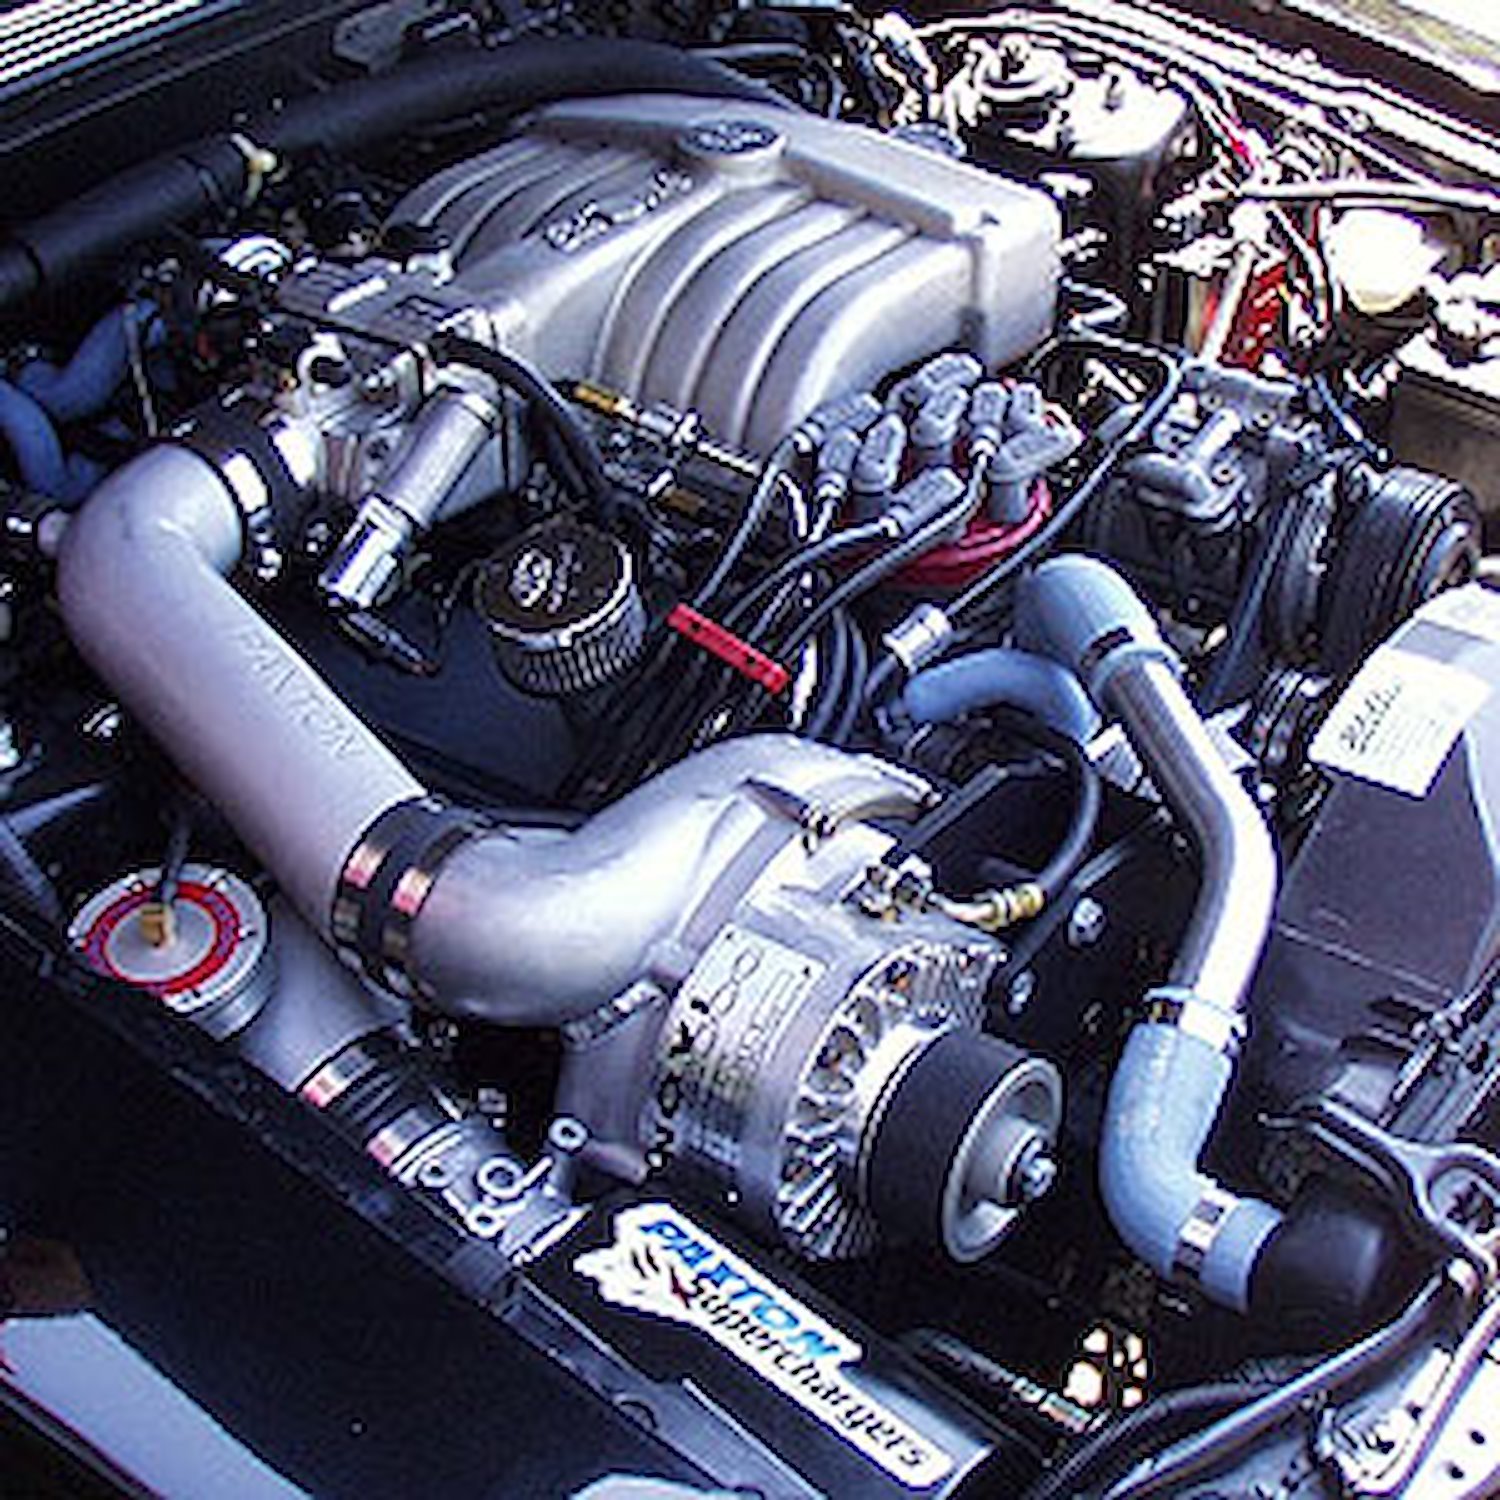 Real Street Class Tuner Supercharger System 1986-93 Mustang 5.0L